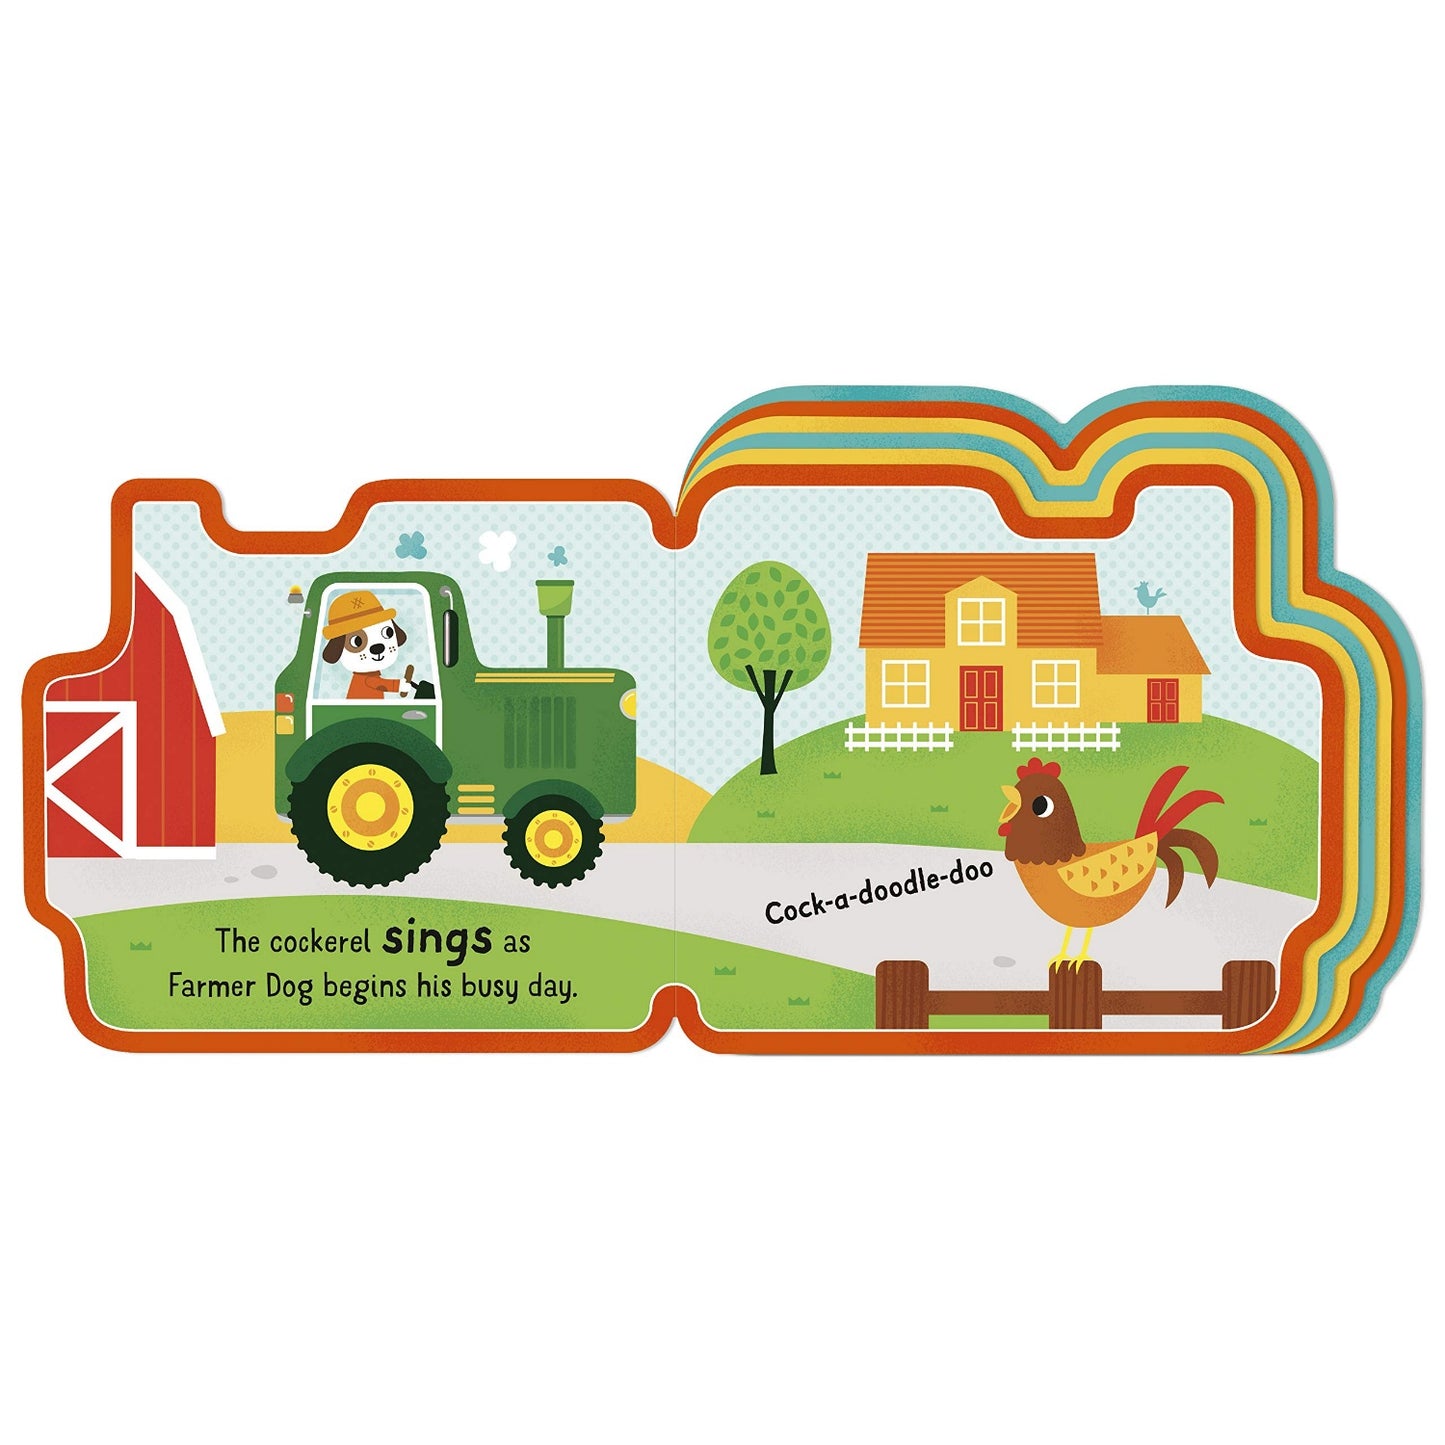 Let’s Go, Tractor! | Children’s Book on Farm Life